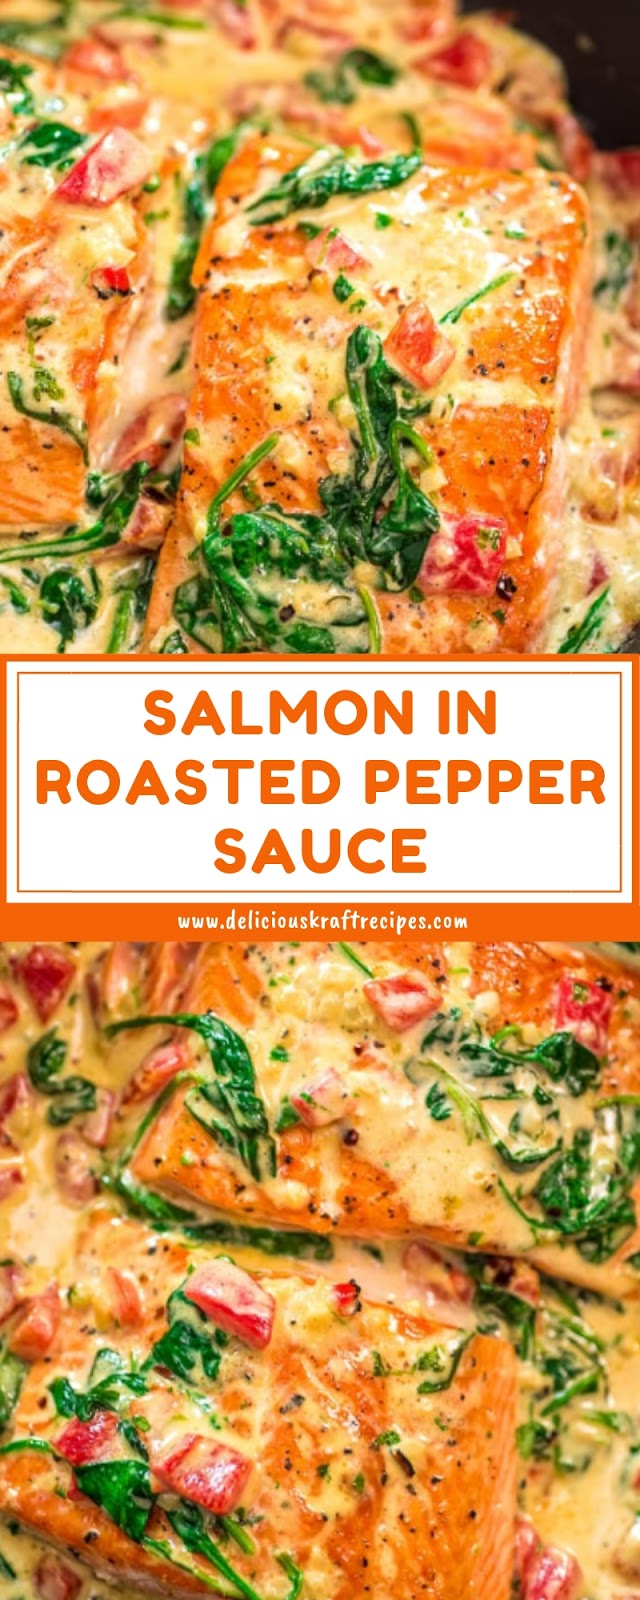 SALMON IN ROASTED PEPPER SAUCE